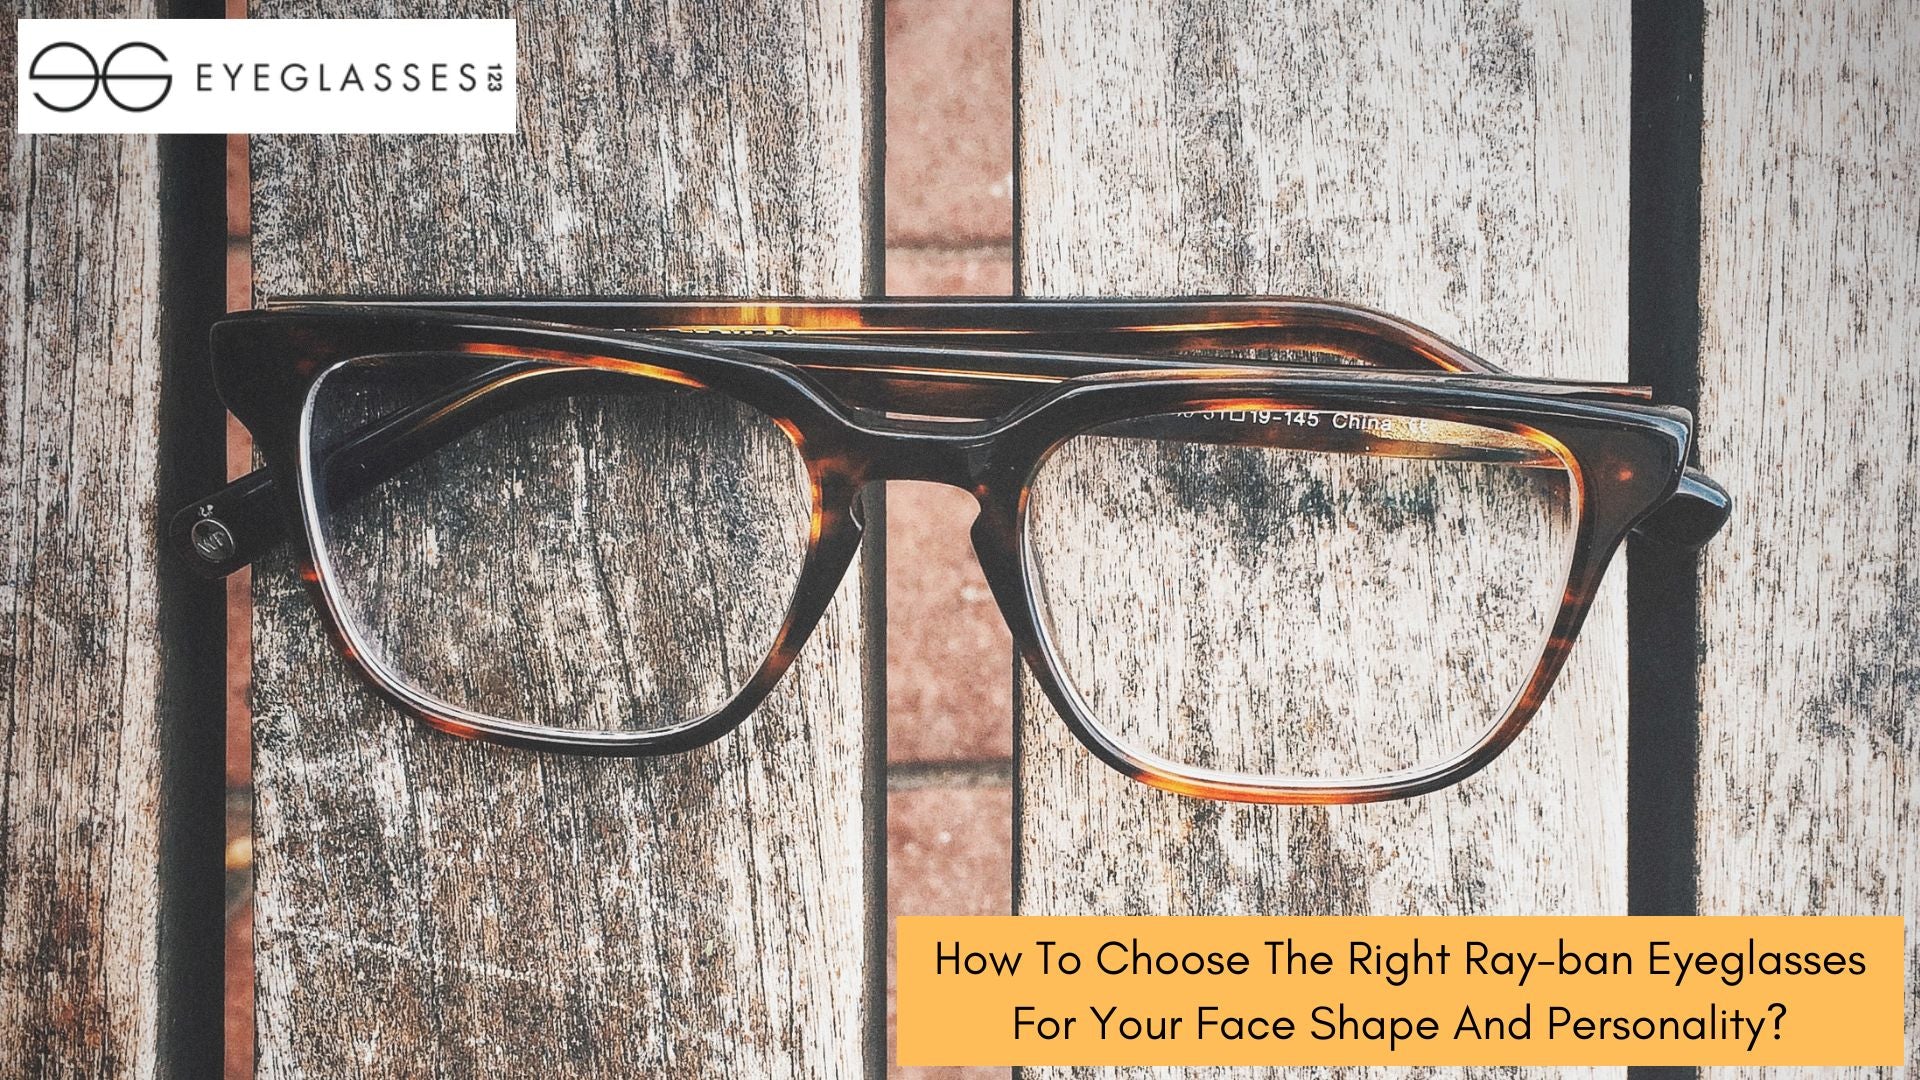 How To Choose The Right Ray-ban Eyeglasses For Your Face Shape And Personality?